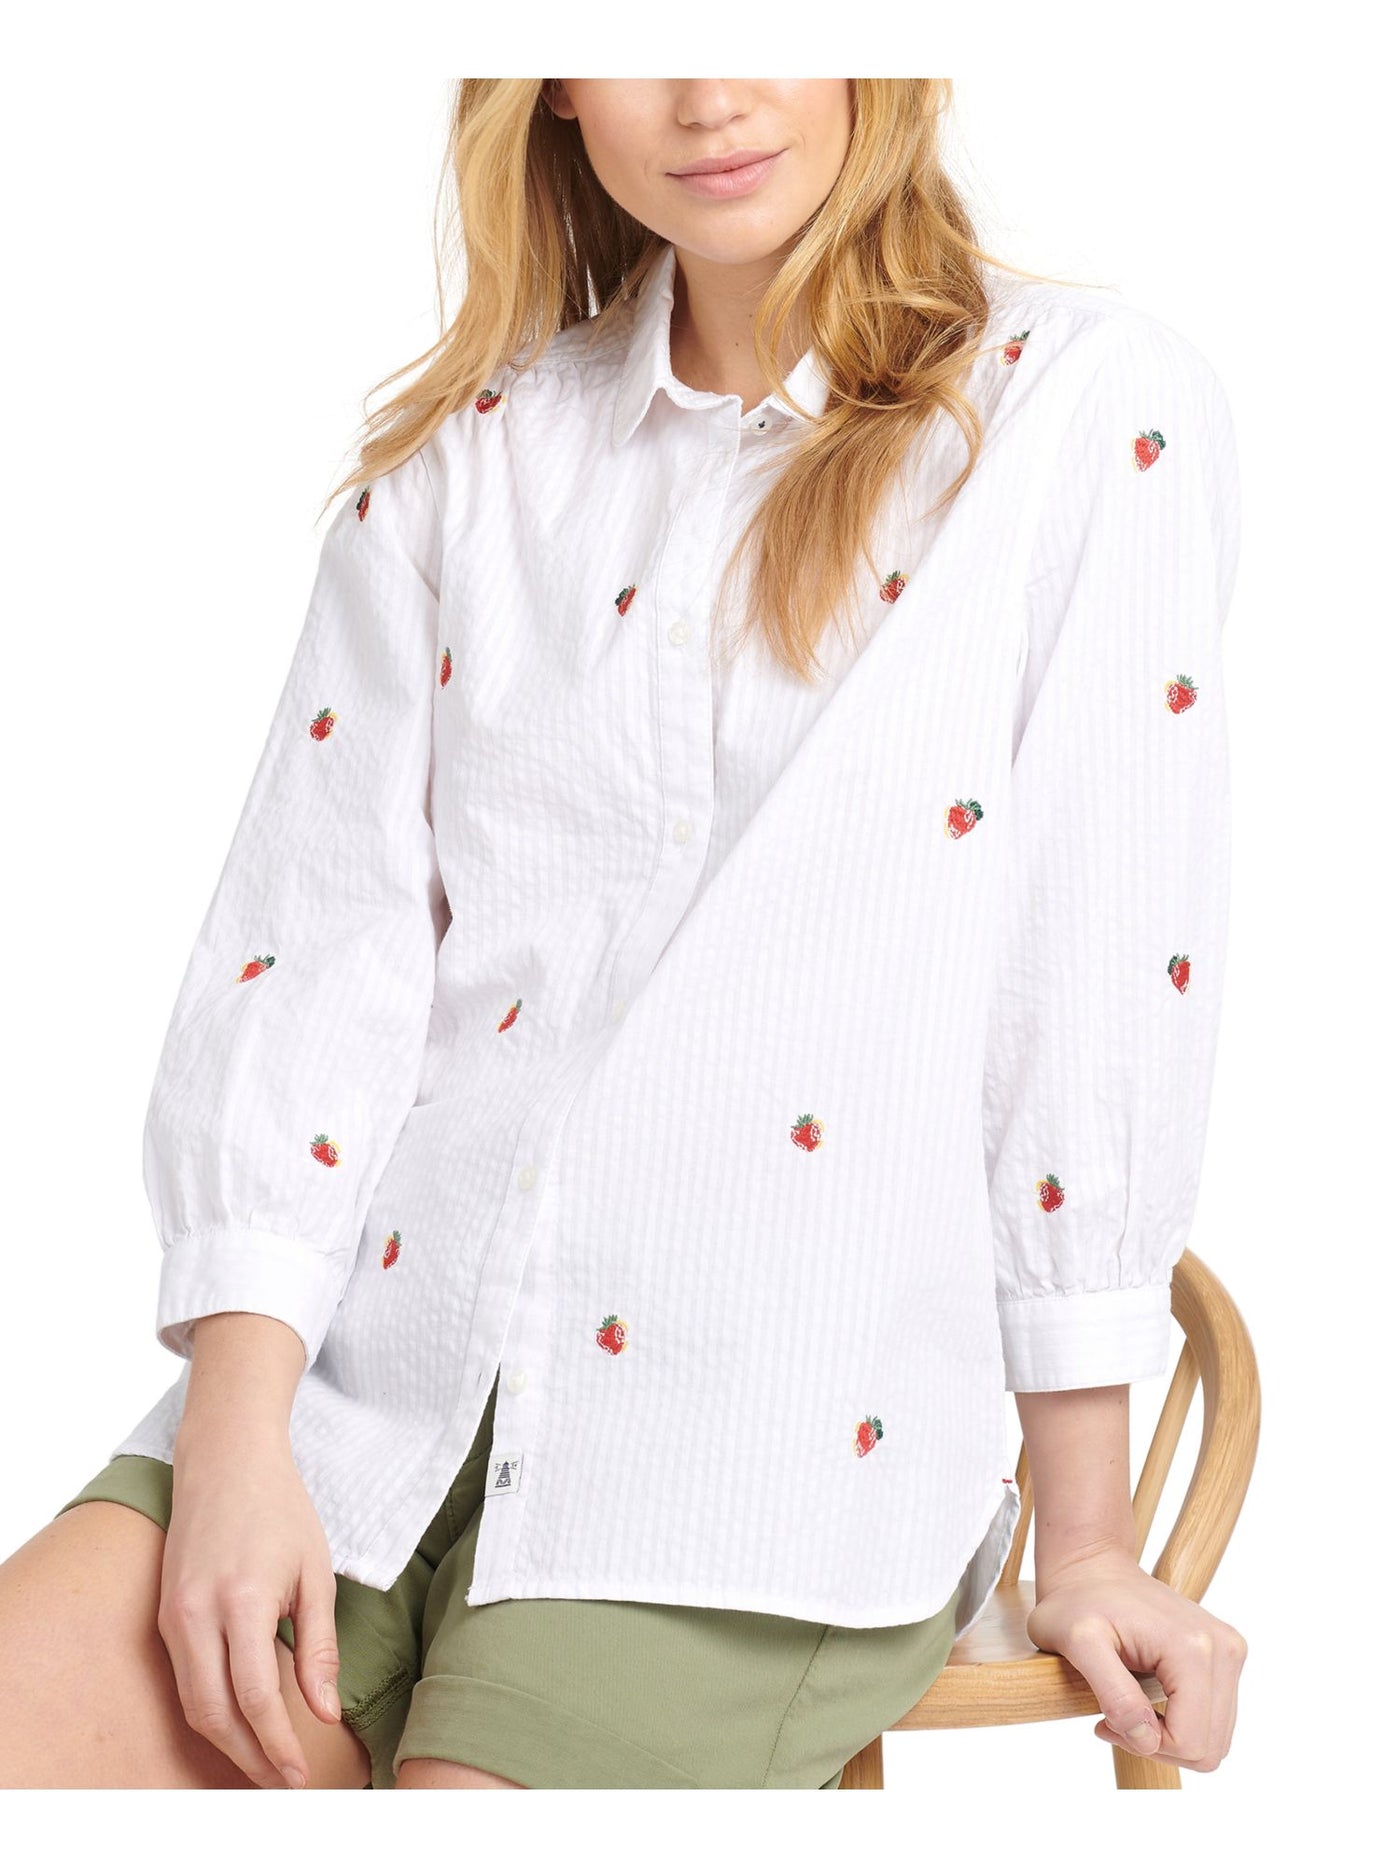 BARBOUR Womens White Textured Embroidered Cuffed Curved Hem Slitted Striped 3/4 Sleeve Collared Button Up Top 8